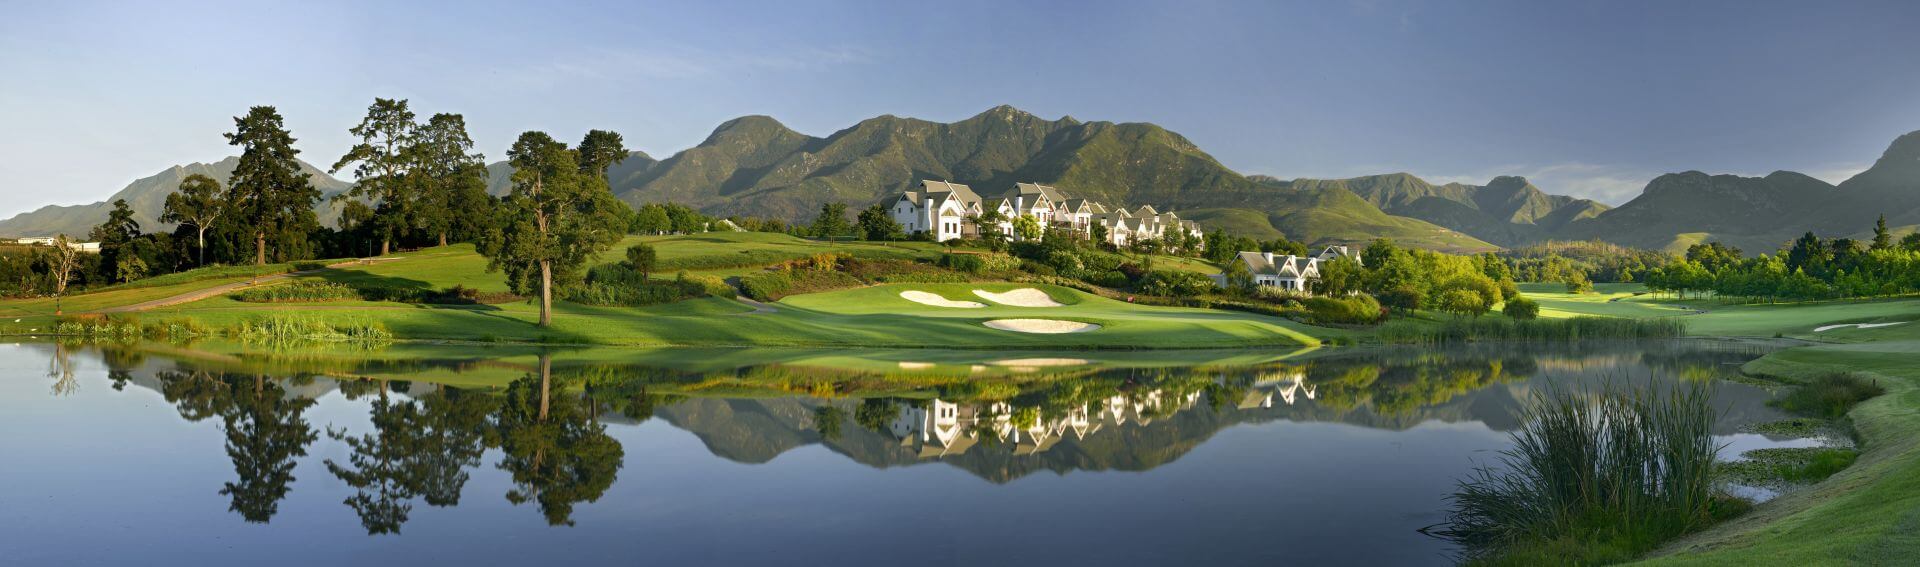 Fancourt south africa 2